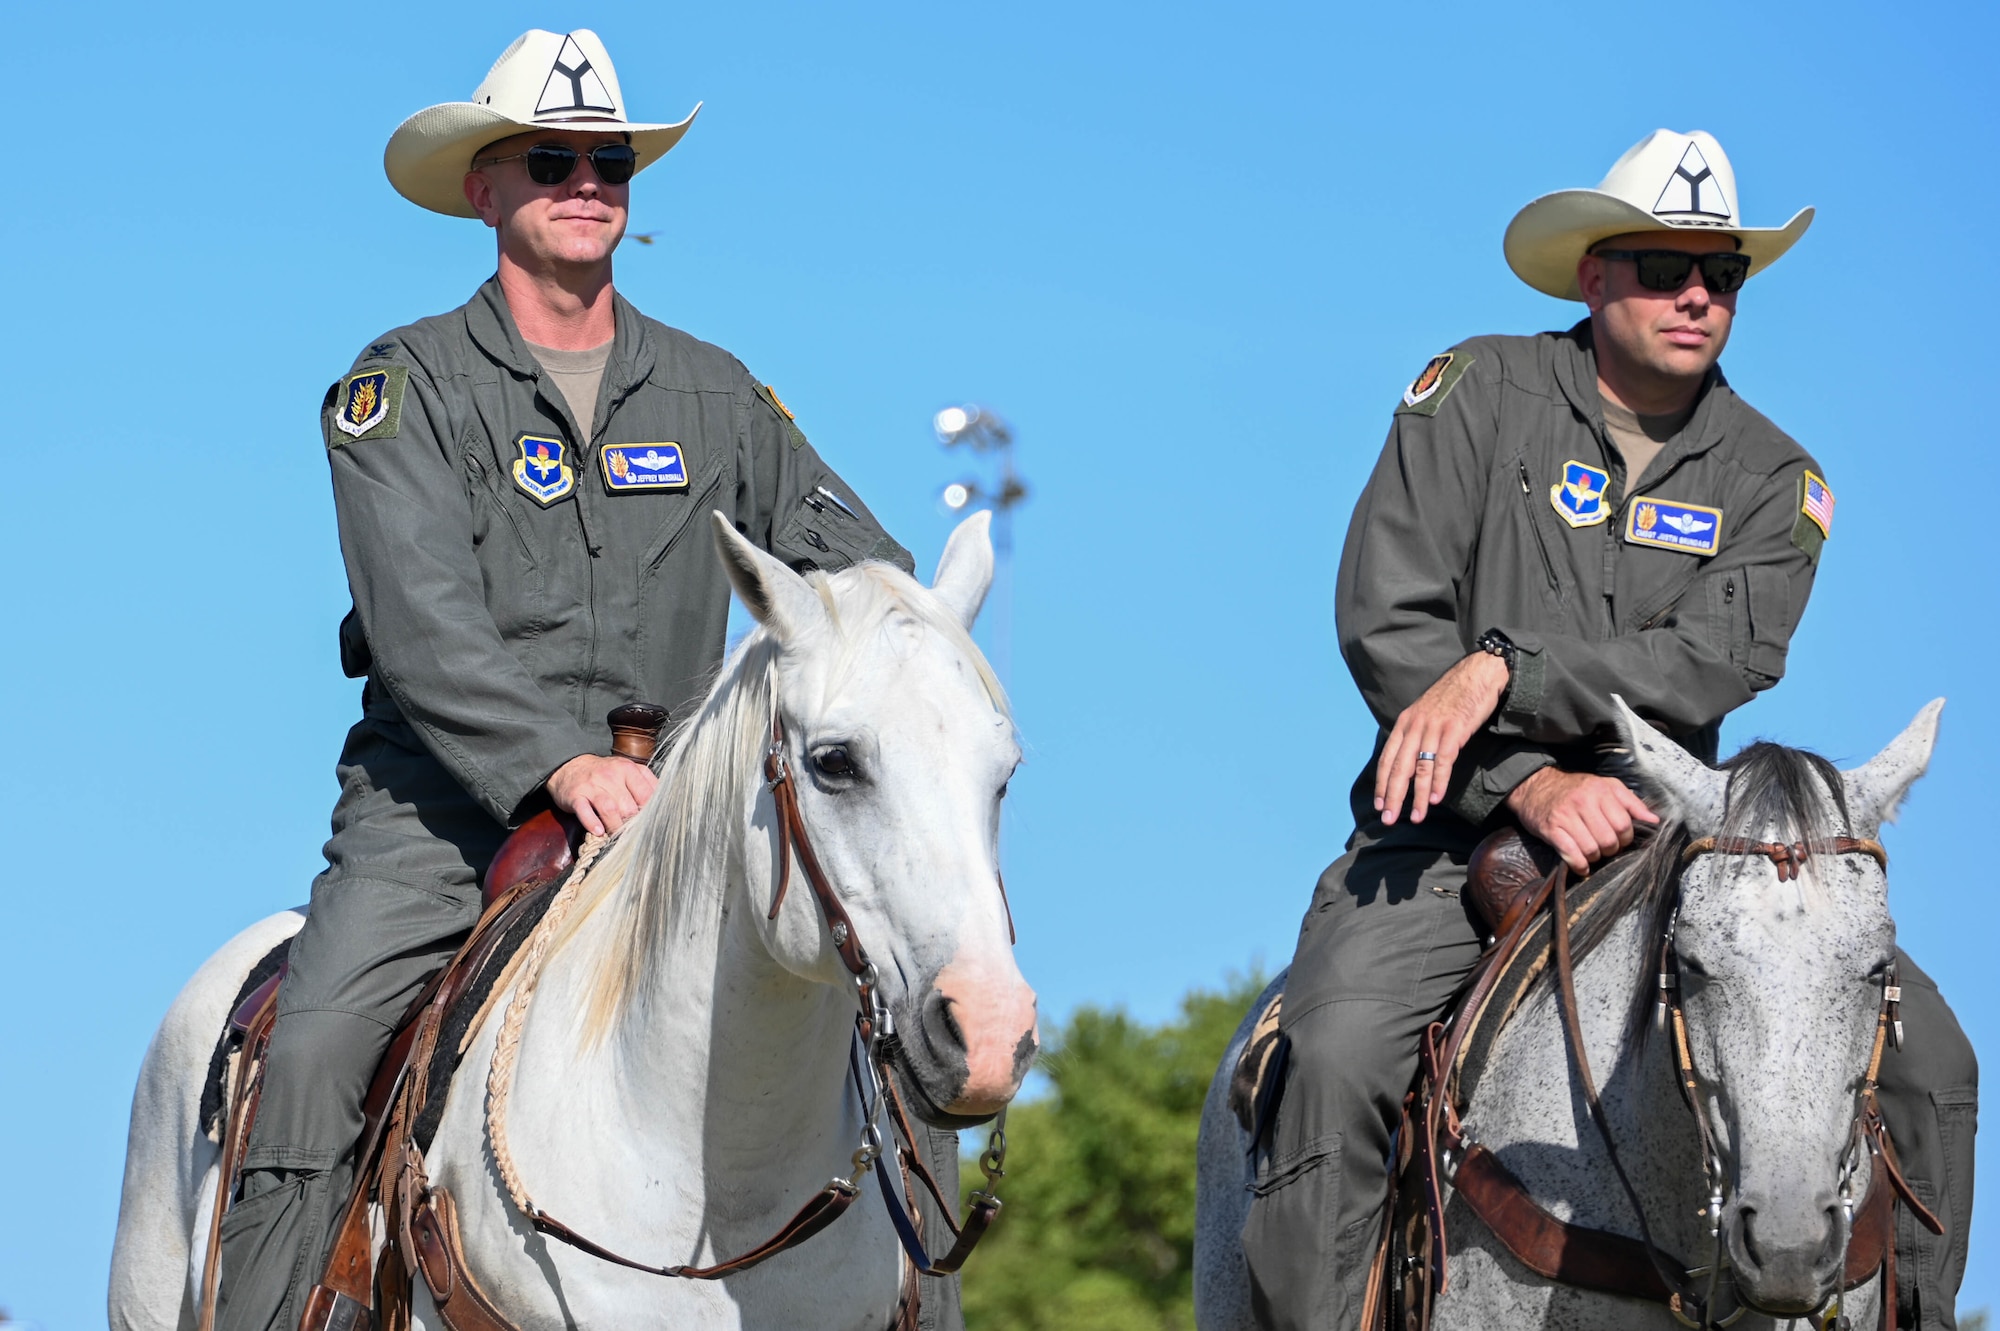 U.S. Air Force Col. Jeffrey Marshall, 97th Air Mobility Wing commander, and Chief Master Sgt. Justin Brundage, 97th Air Mobility Wing command chief, wait for the start of the 25th Annual Cattle Drive at Altus Air Force Base (AFB), Oklahoma, Aug. 24, 2023. Marshall and Brundage are the newest command team leaders at Altus AFB. (U.S. Air Force photo by Airman 1st Class Heidi Bucins)